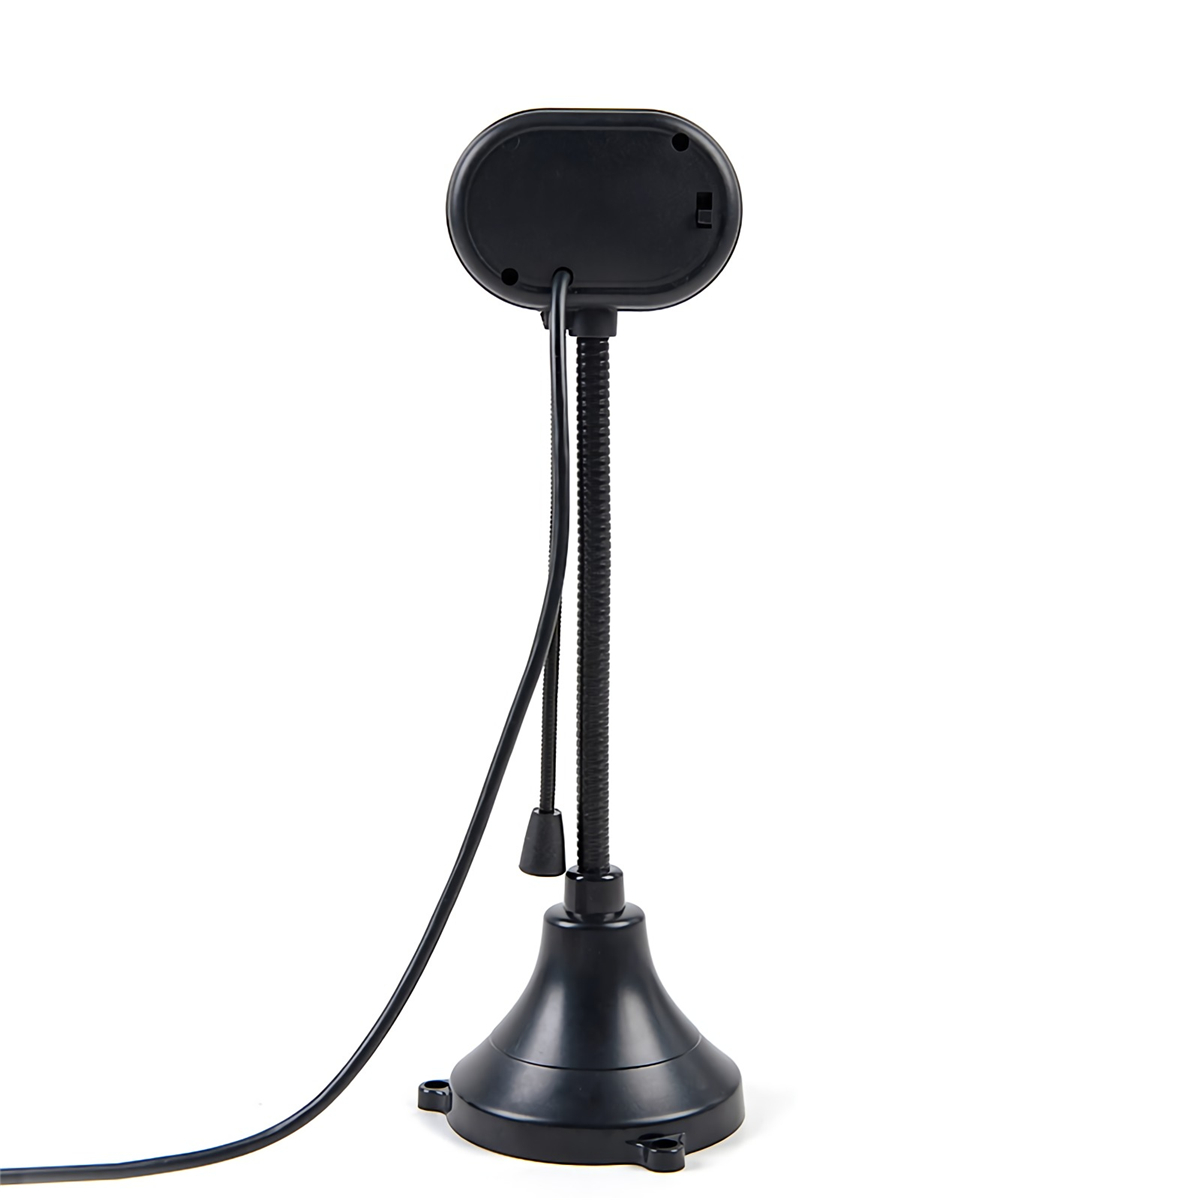 Find 480P HD Webcam CMOS USB 2 0 Wired Computer Web Camera Built in Microphone Camera for Desktop Computer Notebook PC for Sale on Gipsybee.com with cryptocurrencies